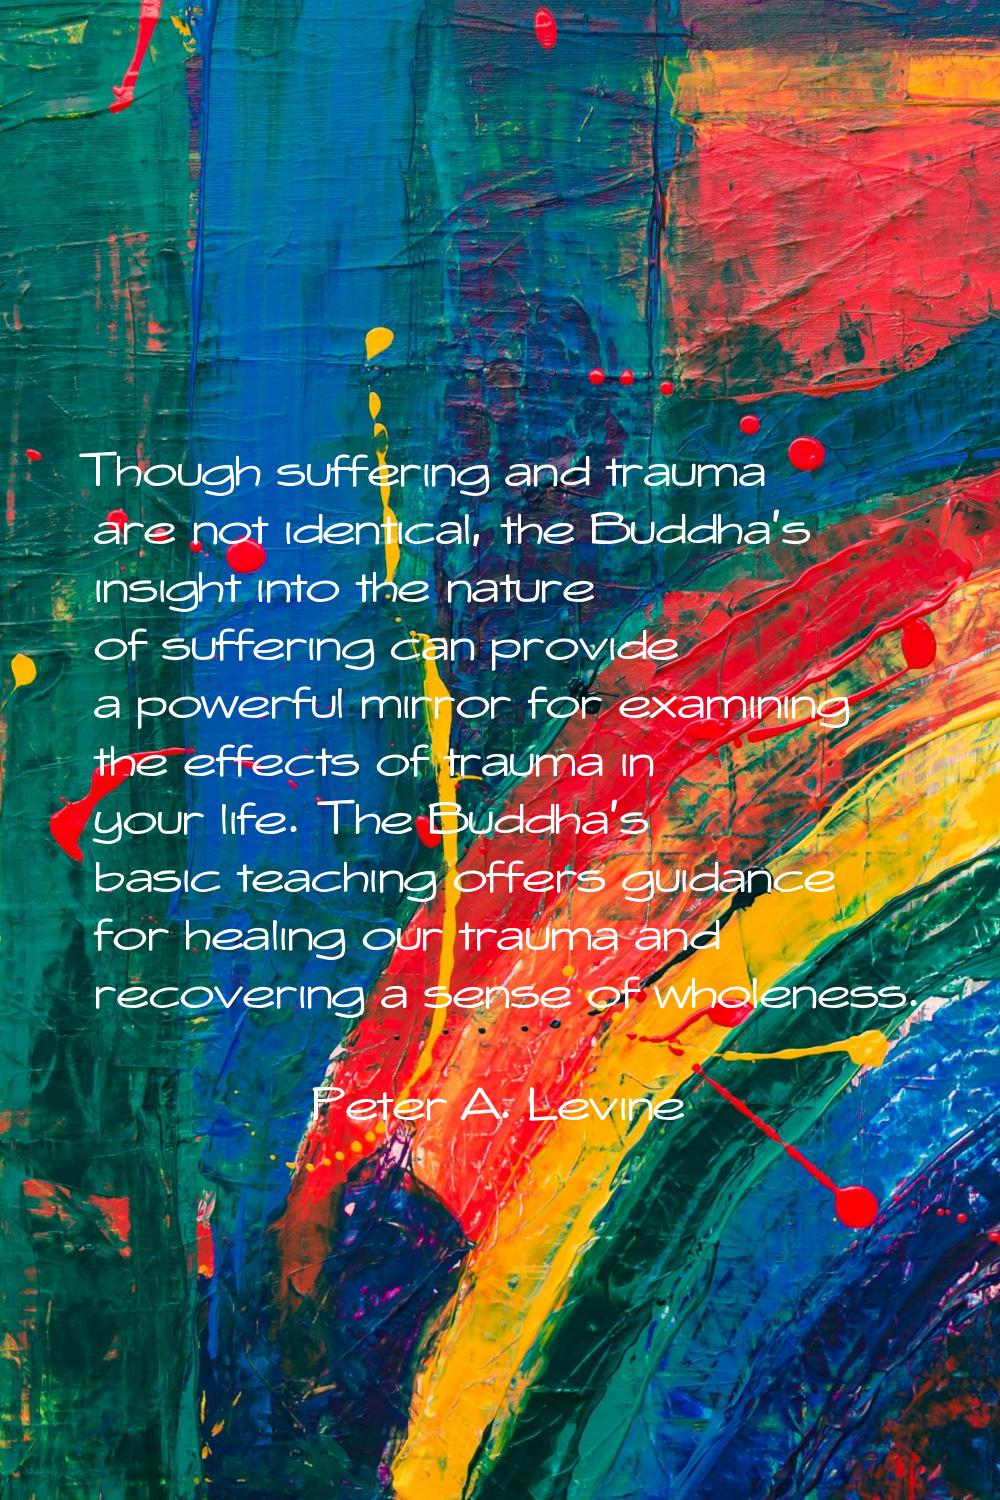 Though suffering and trauma are not identical, the Buddha's insight into the nature of suffering ca